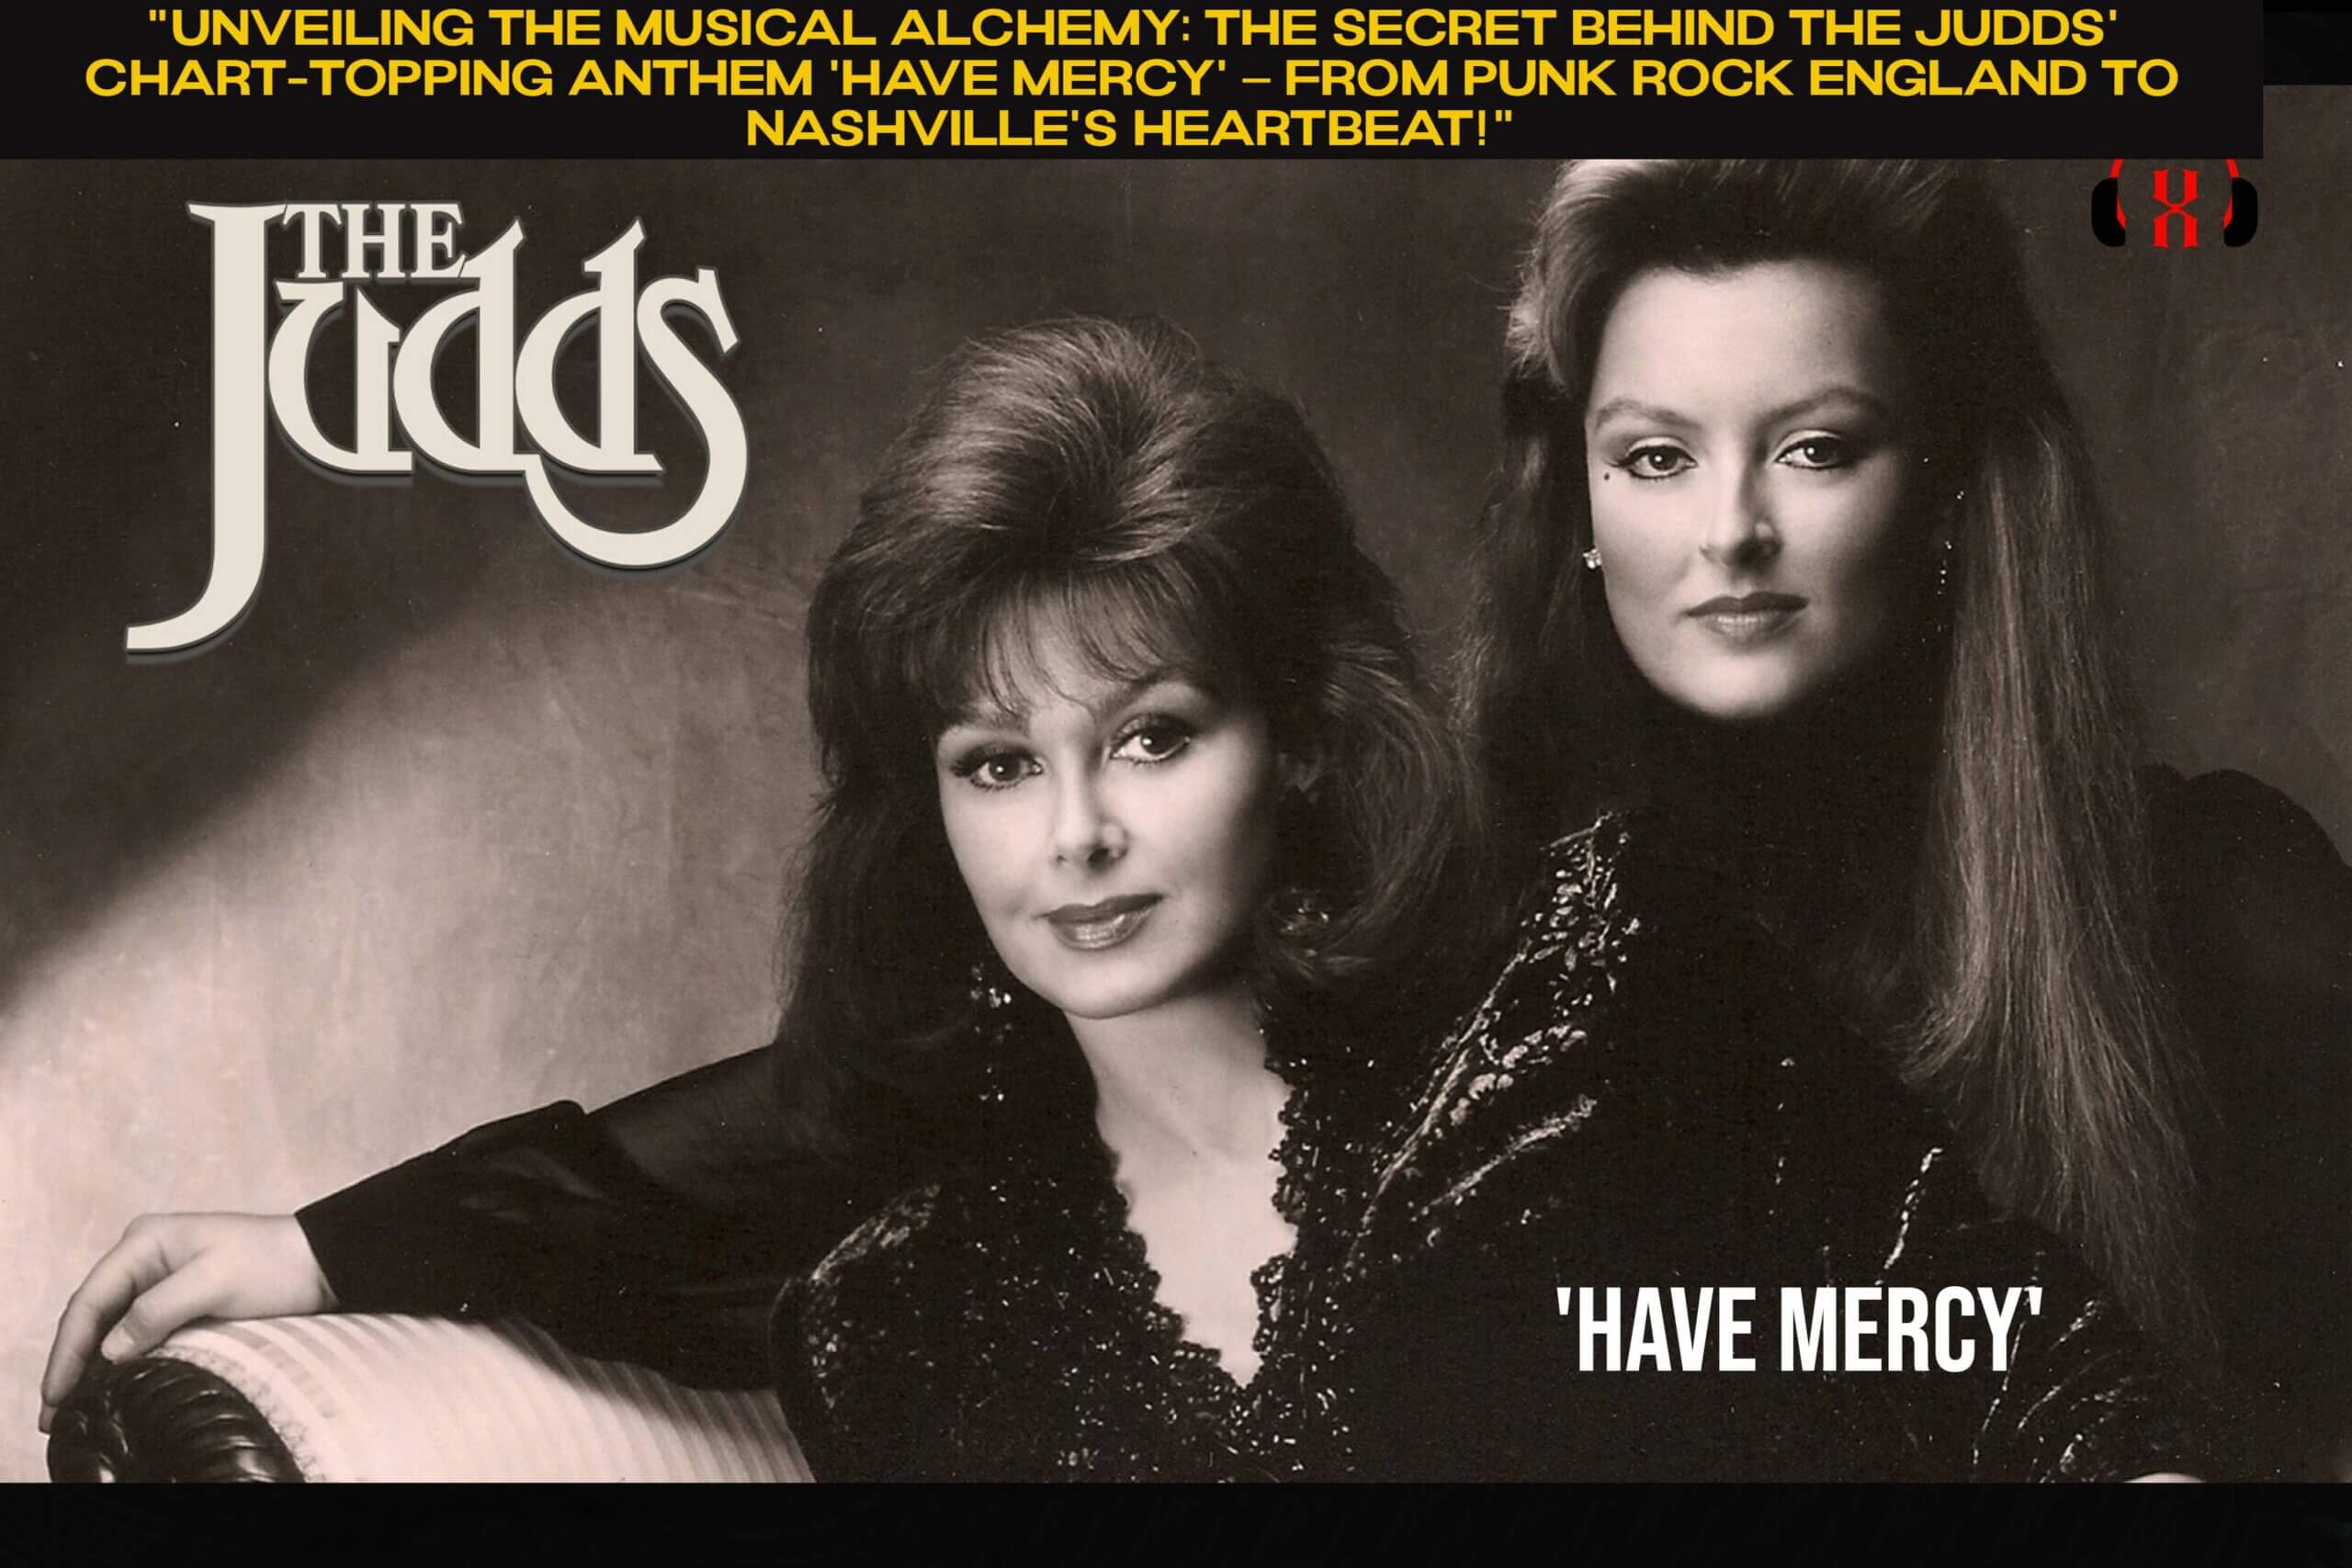 The Secret Behind The Judds’ Chart-Topping Anthem ‘Have Mercy’ – From Punk Rock England to Nashville’s Heartbeat!”